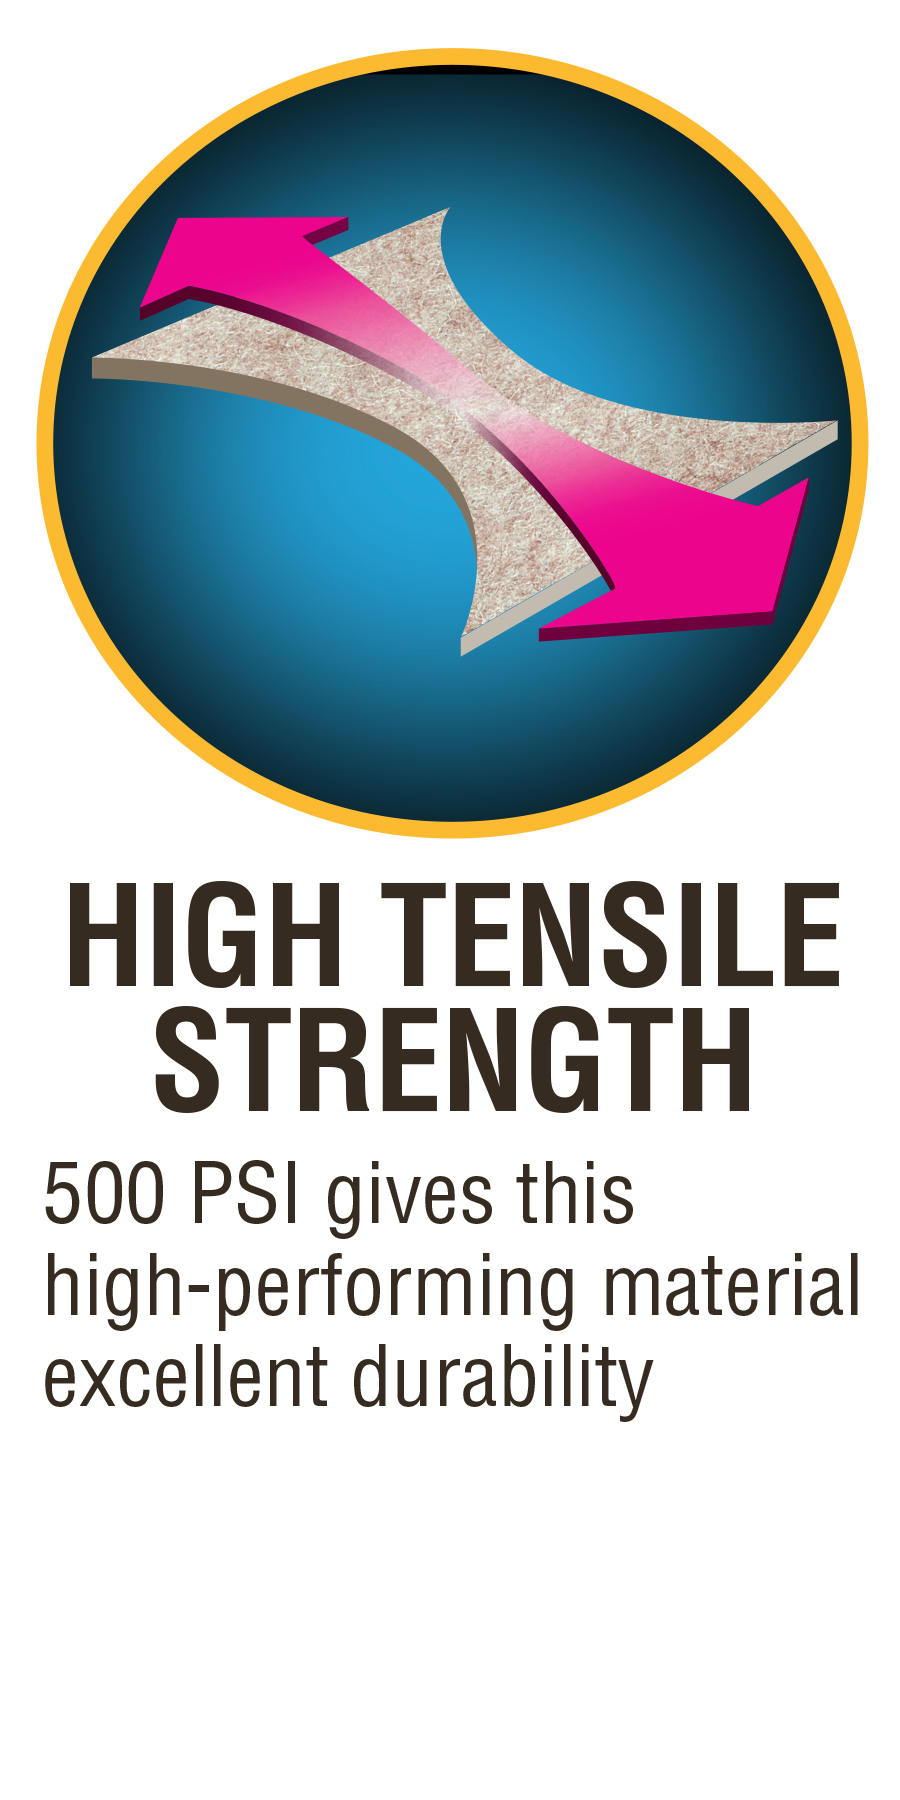 High Tensile Strength 500 PSI gives this high-performing material excellent durability